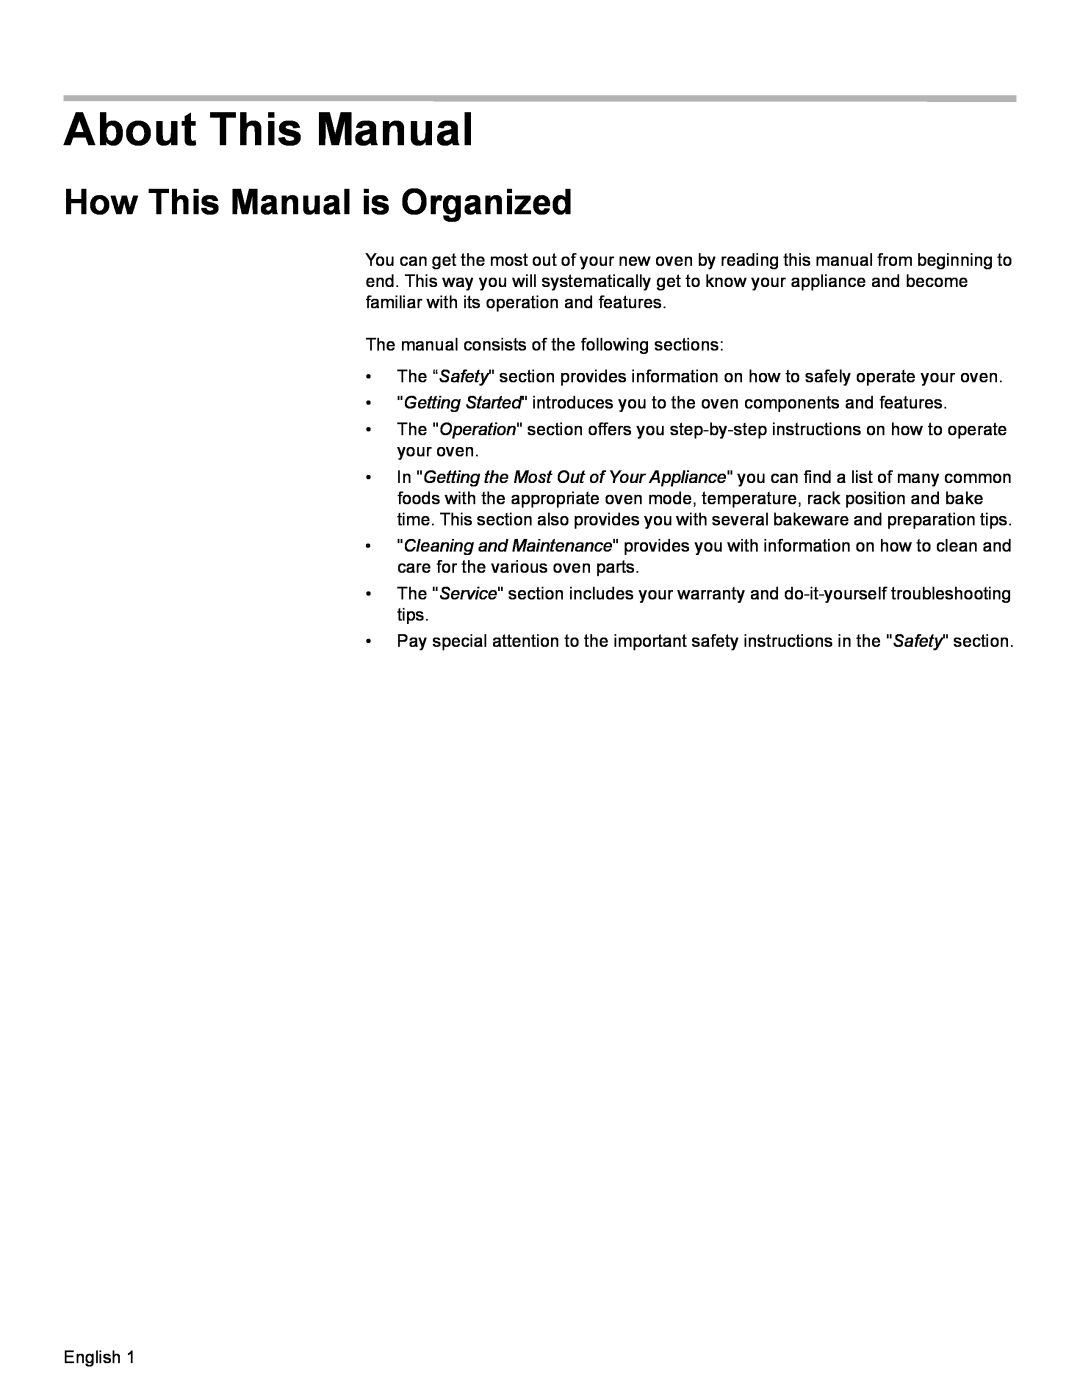 Bosch Appliances HBN54, HBL57, HBL56, HBL54, HBN56 manual About This Manual, How This Manual is Organized 